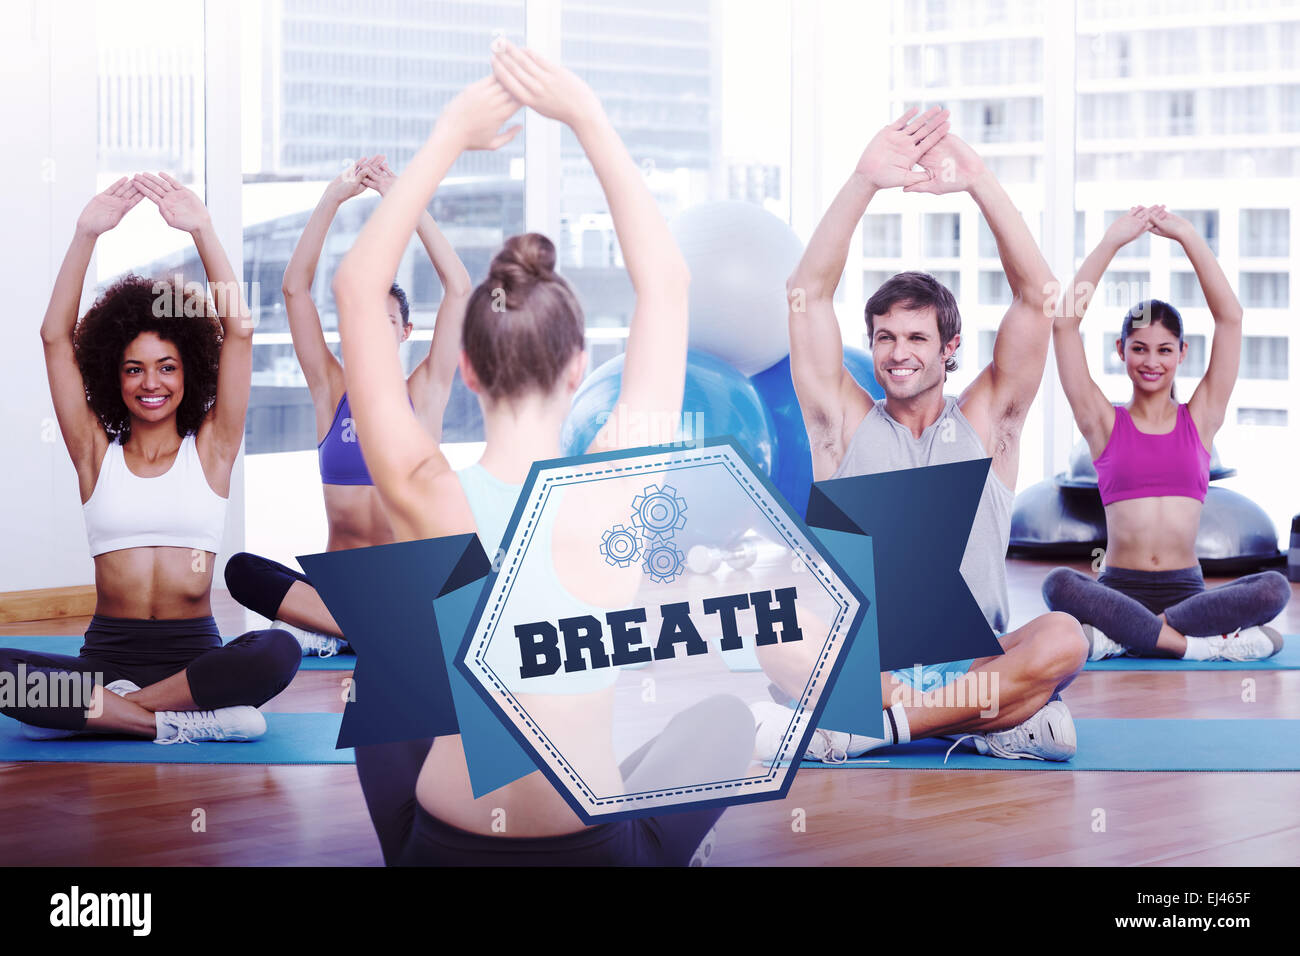 The word breath and people with trainer doing stretching exercises Stock Photo